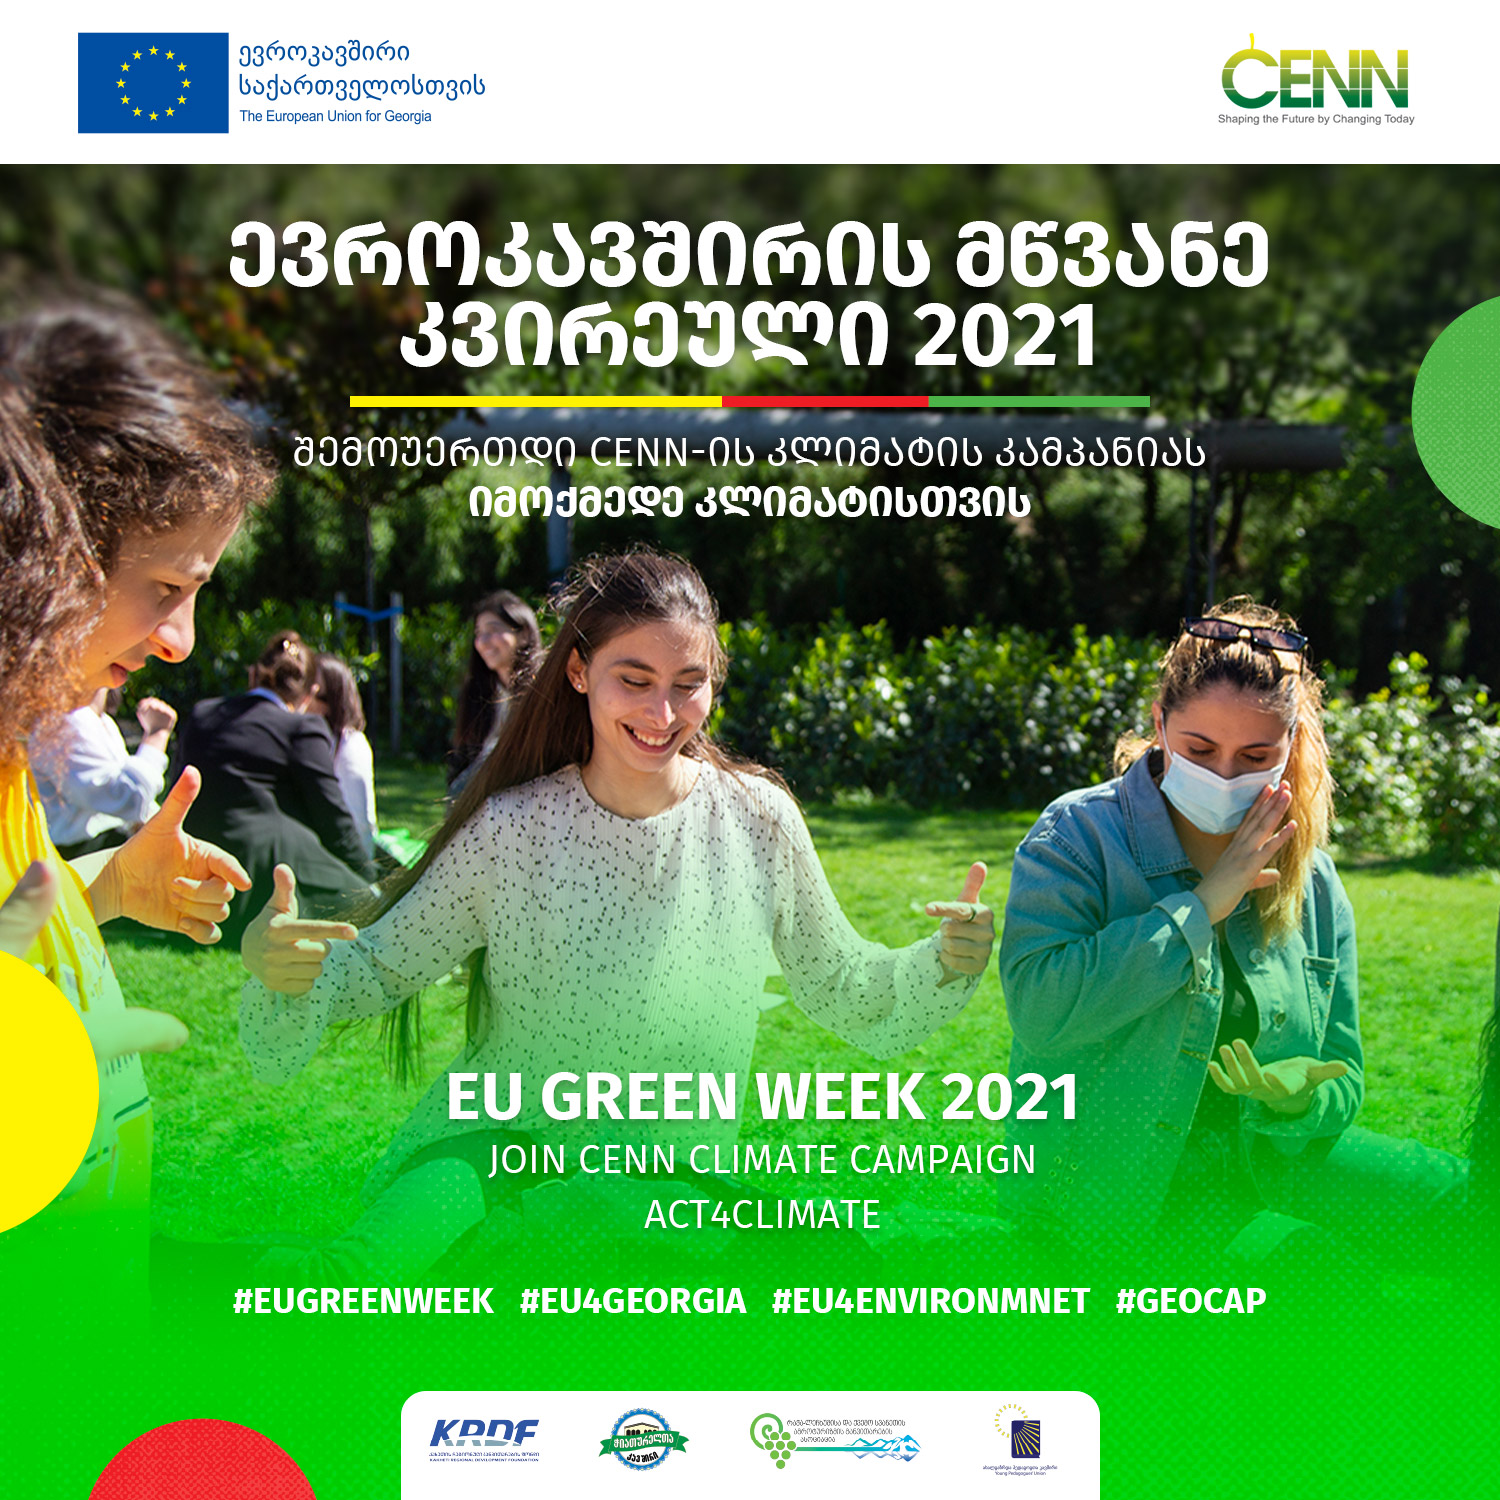 As Part of the EU Green Week 2021, CENN Launches a Large-scale Campaign – Act4Climate